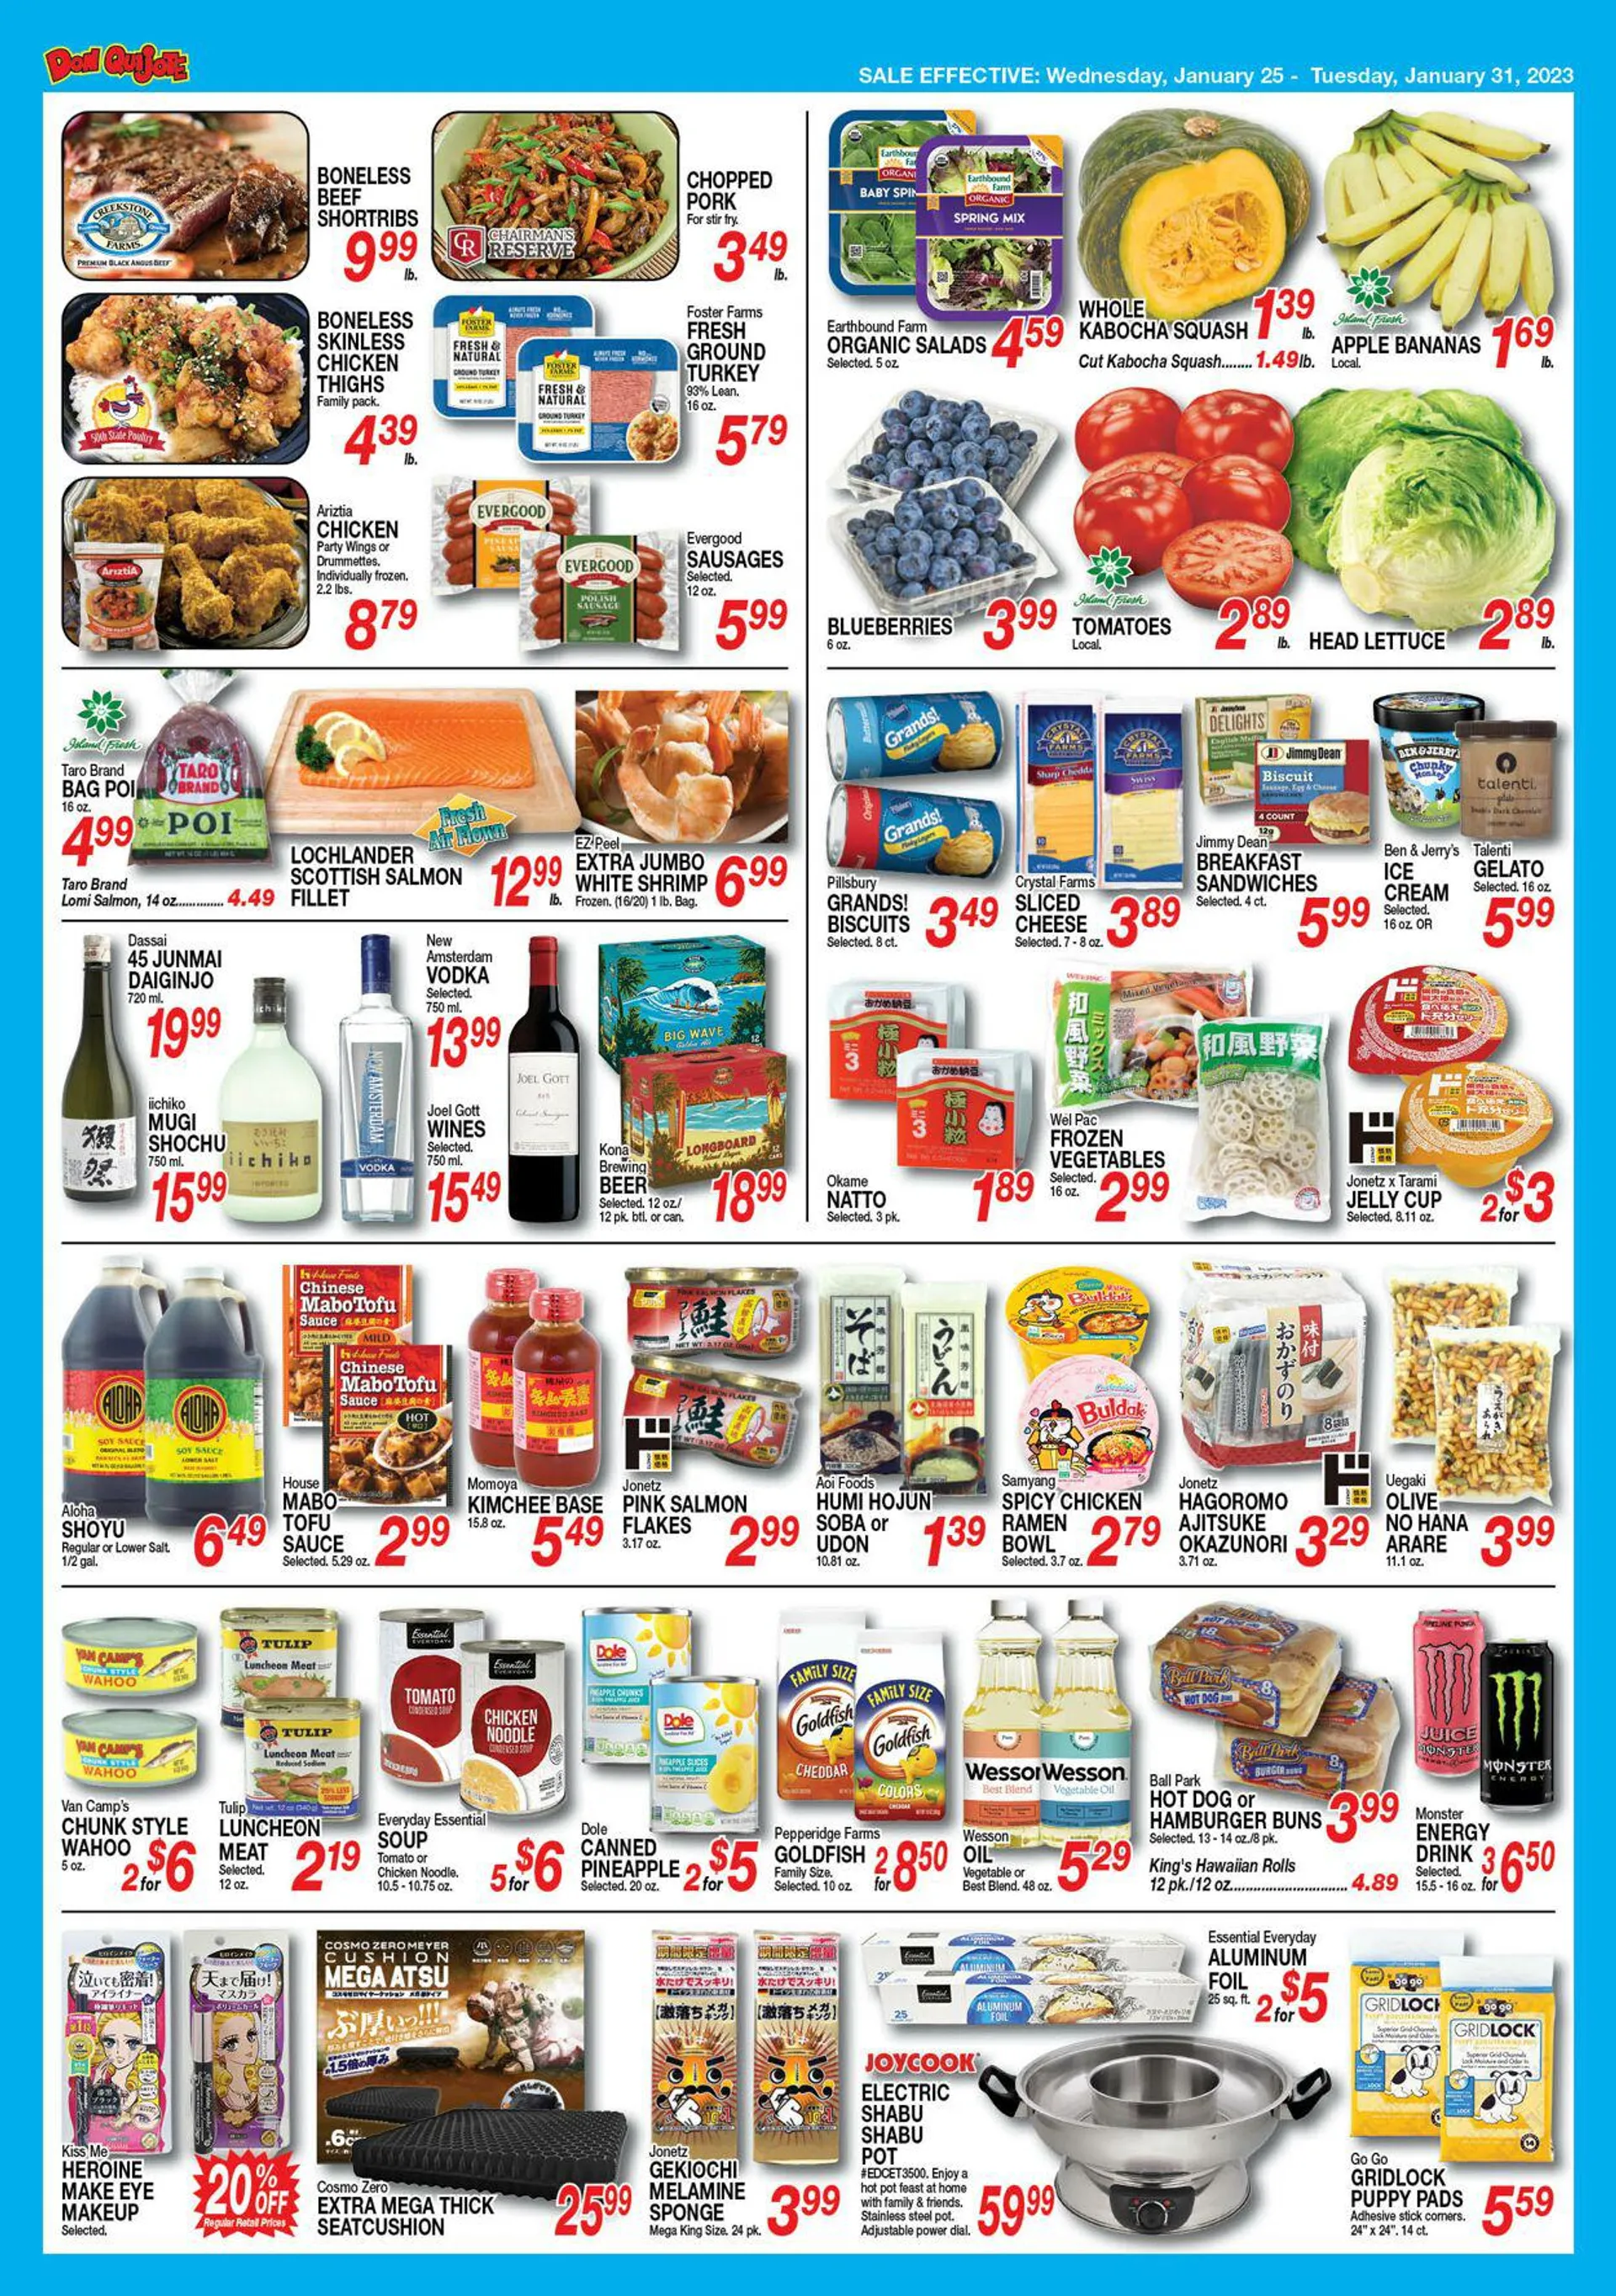 Don Quijote Hawaii Current weekly ad - 2